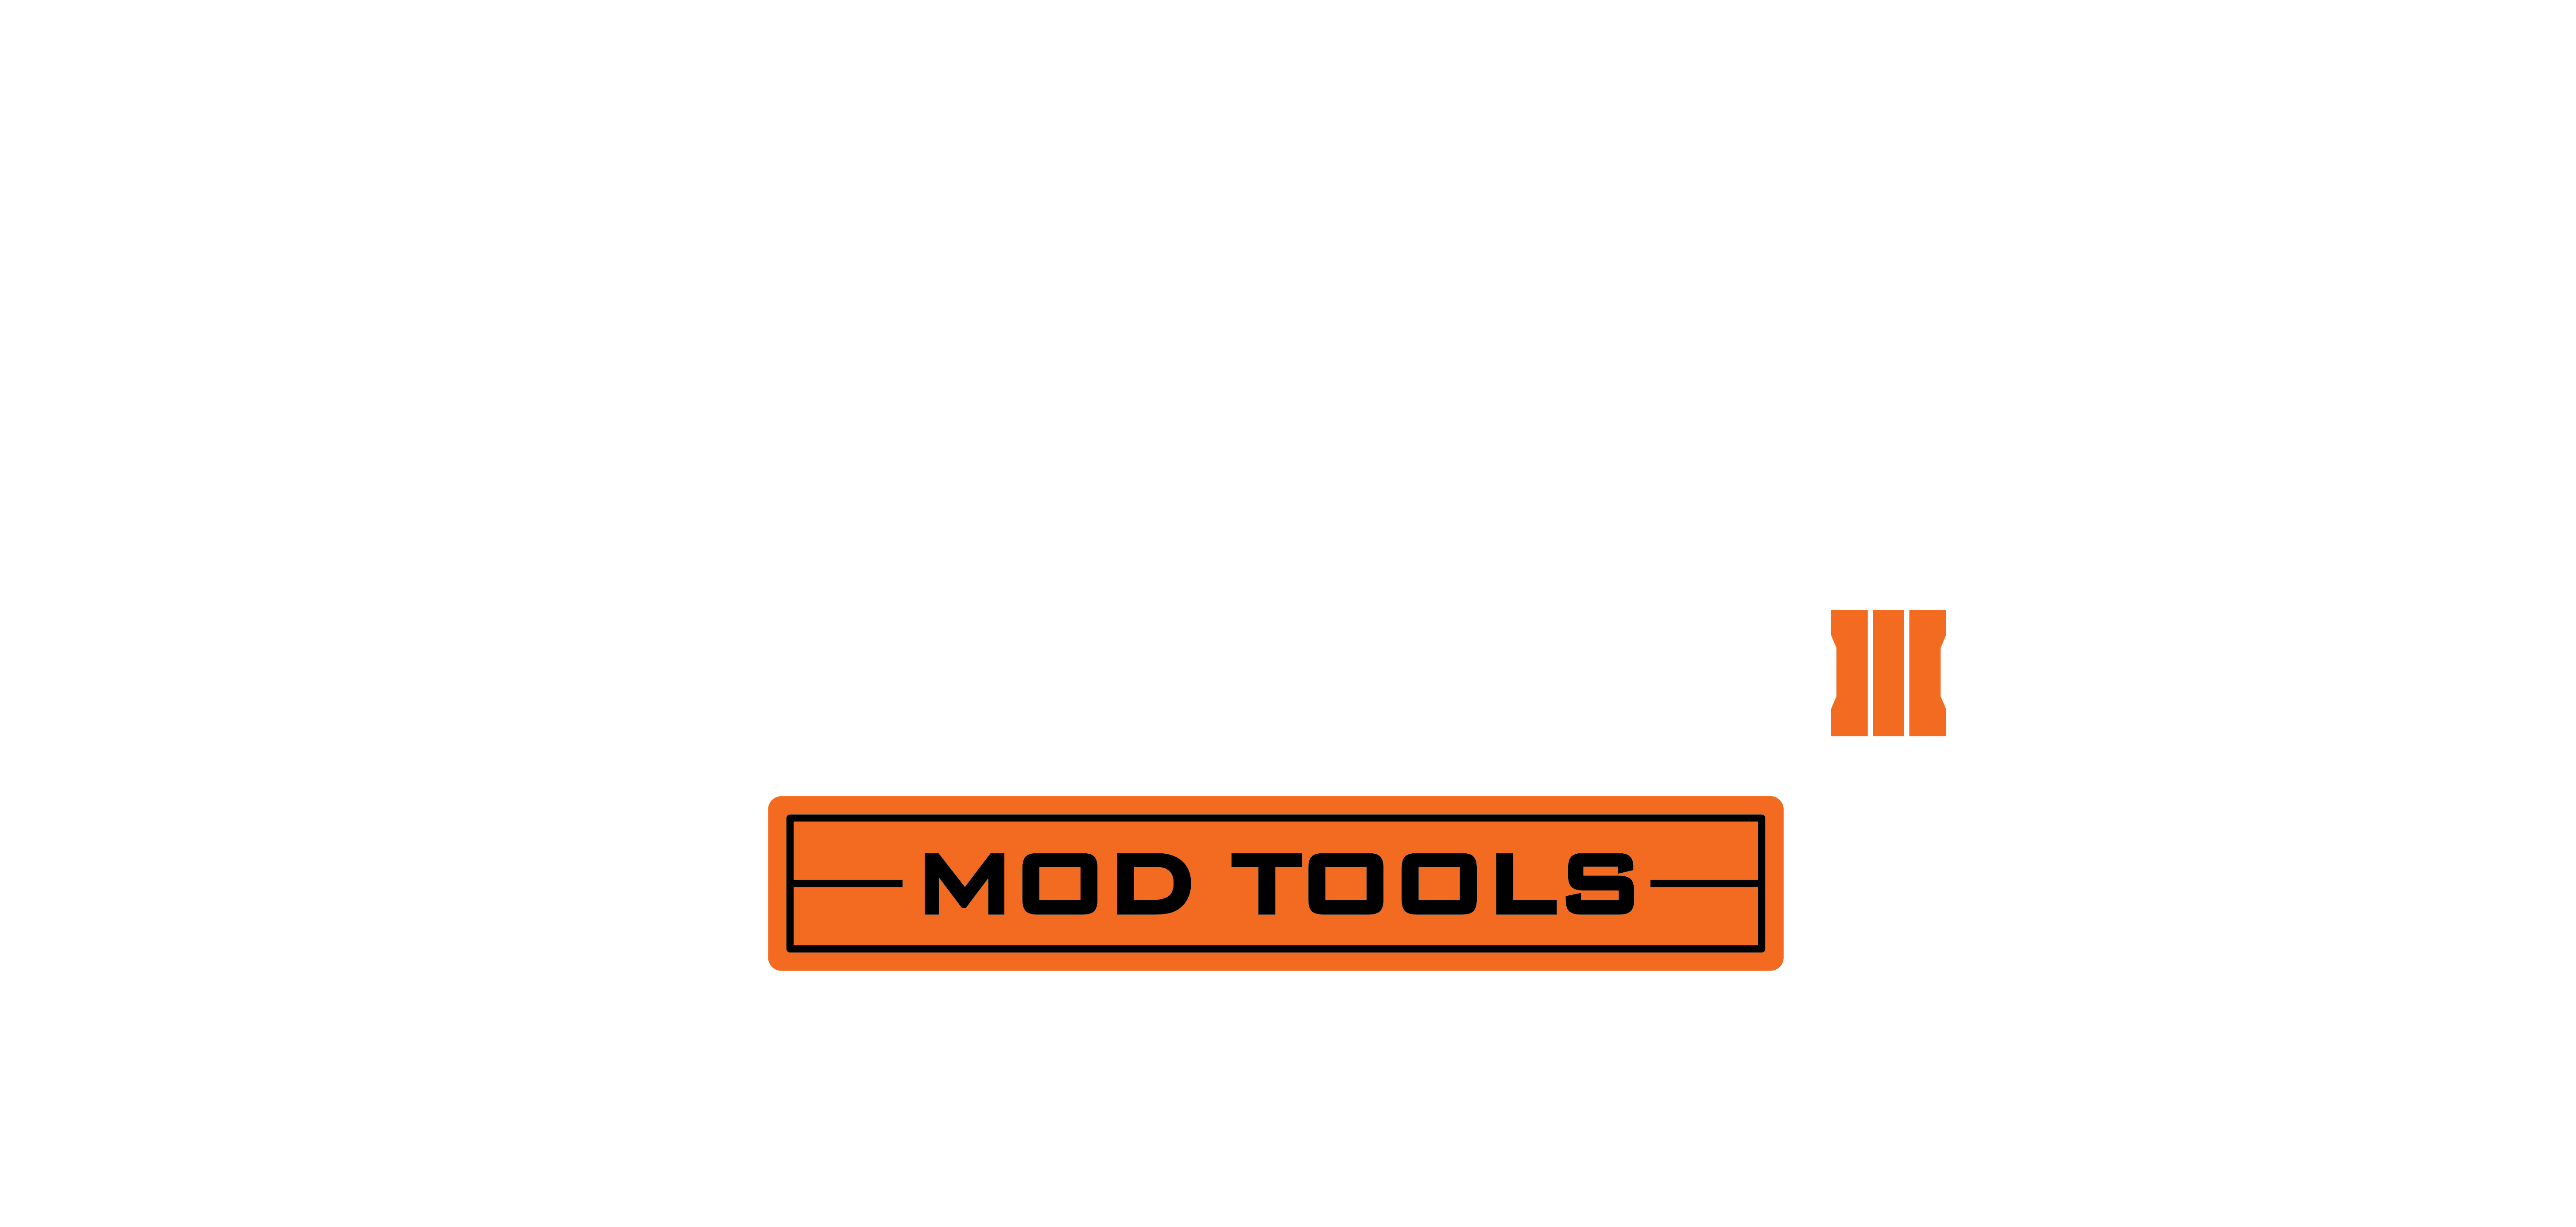 black ops 3 zombies mods